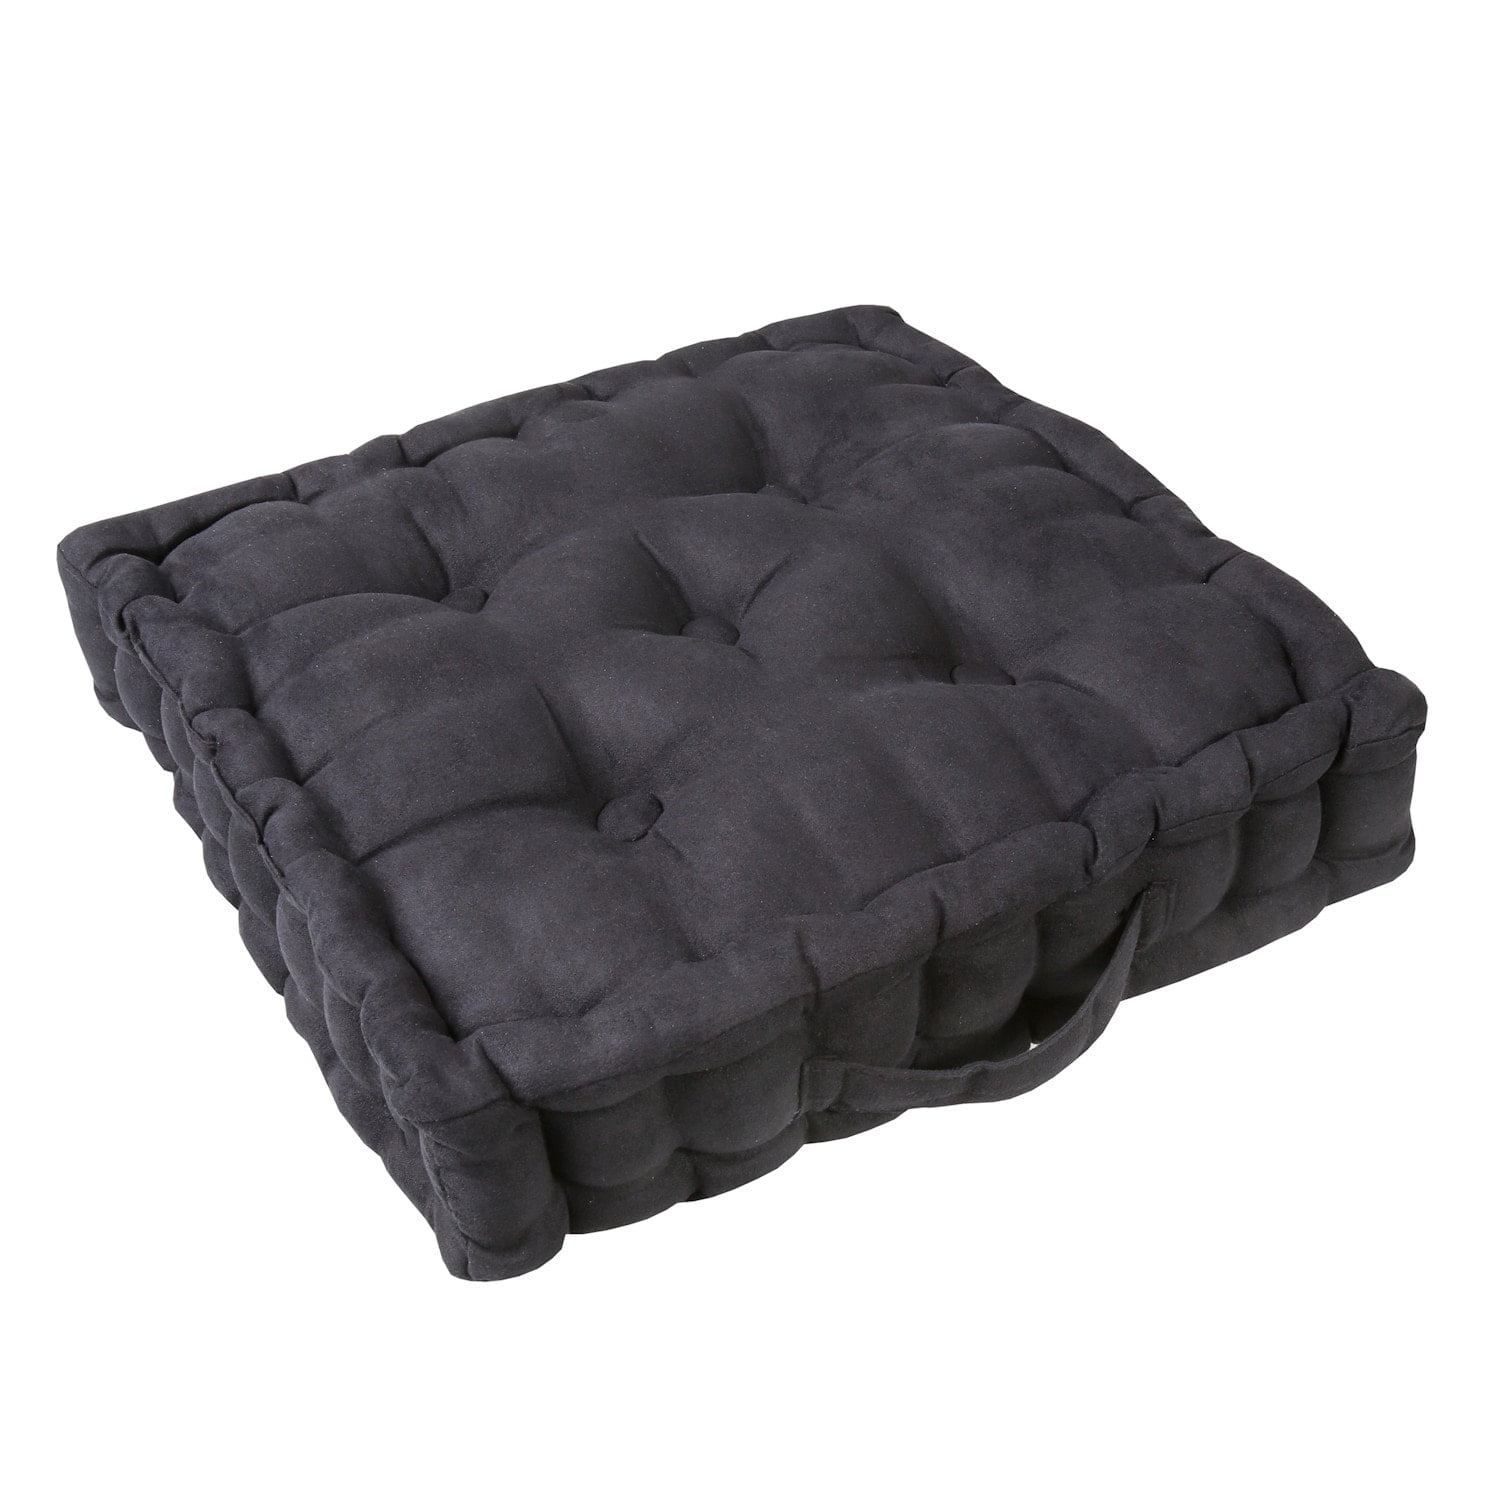 MSR Imports Chair Pad Tufted Padded Booster Cushion, 3 Thick